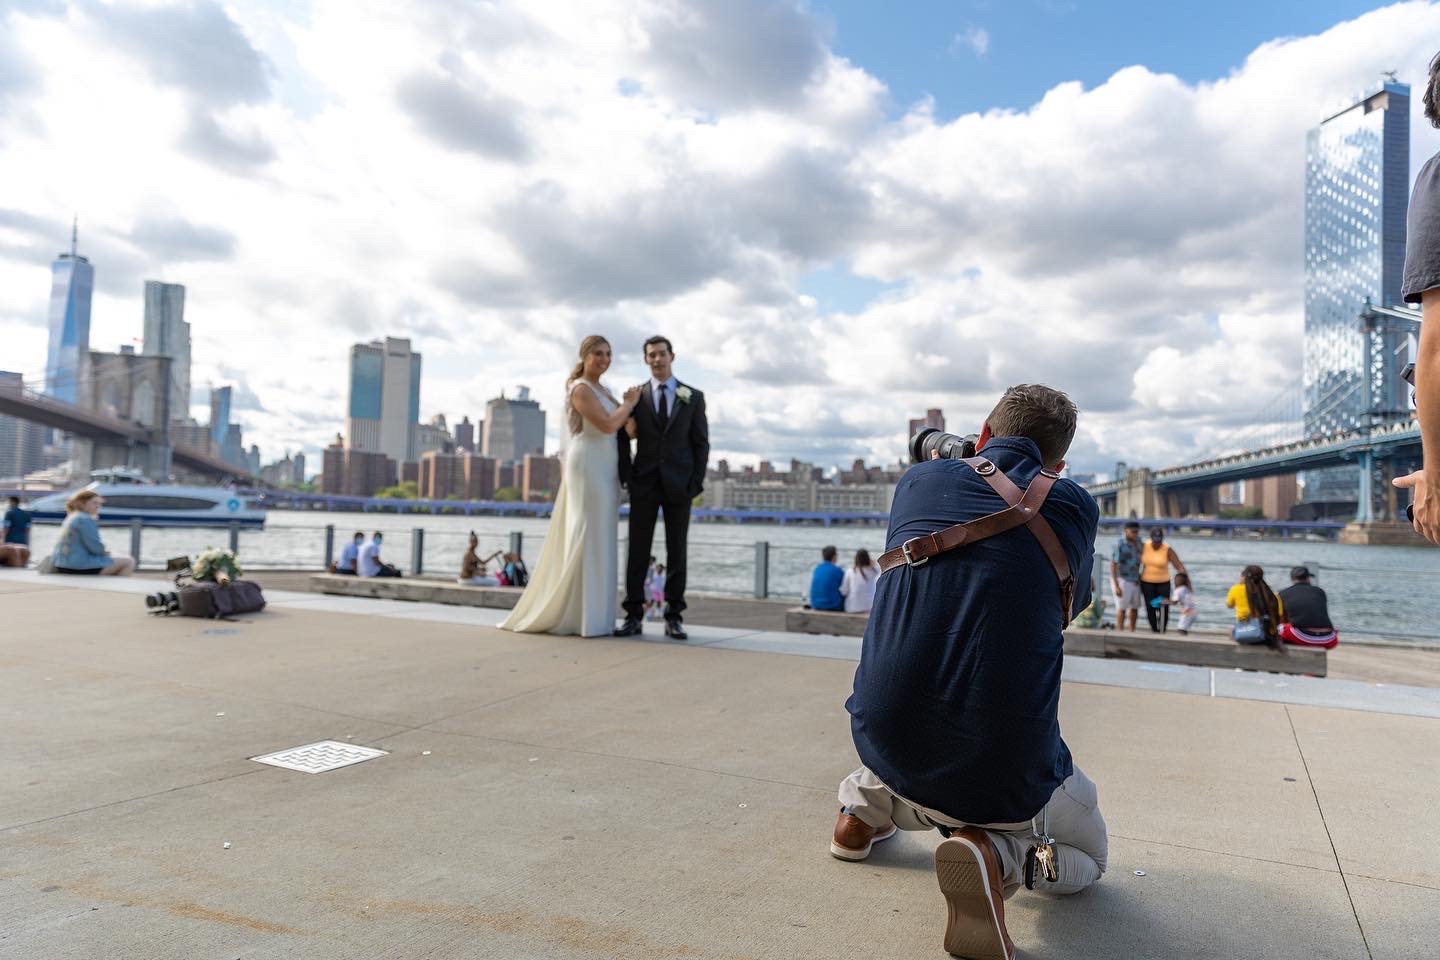 wedding photographer takes photo of bride and groom in New York City